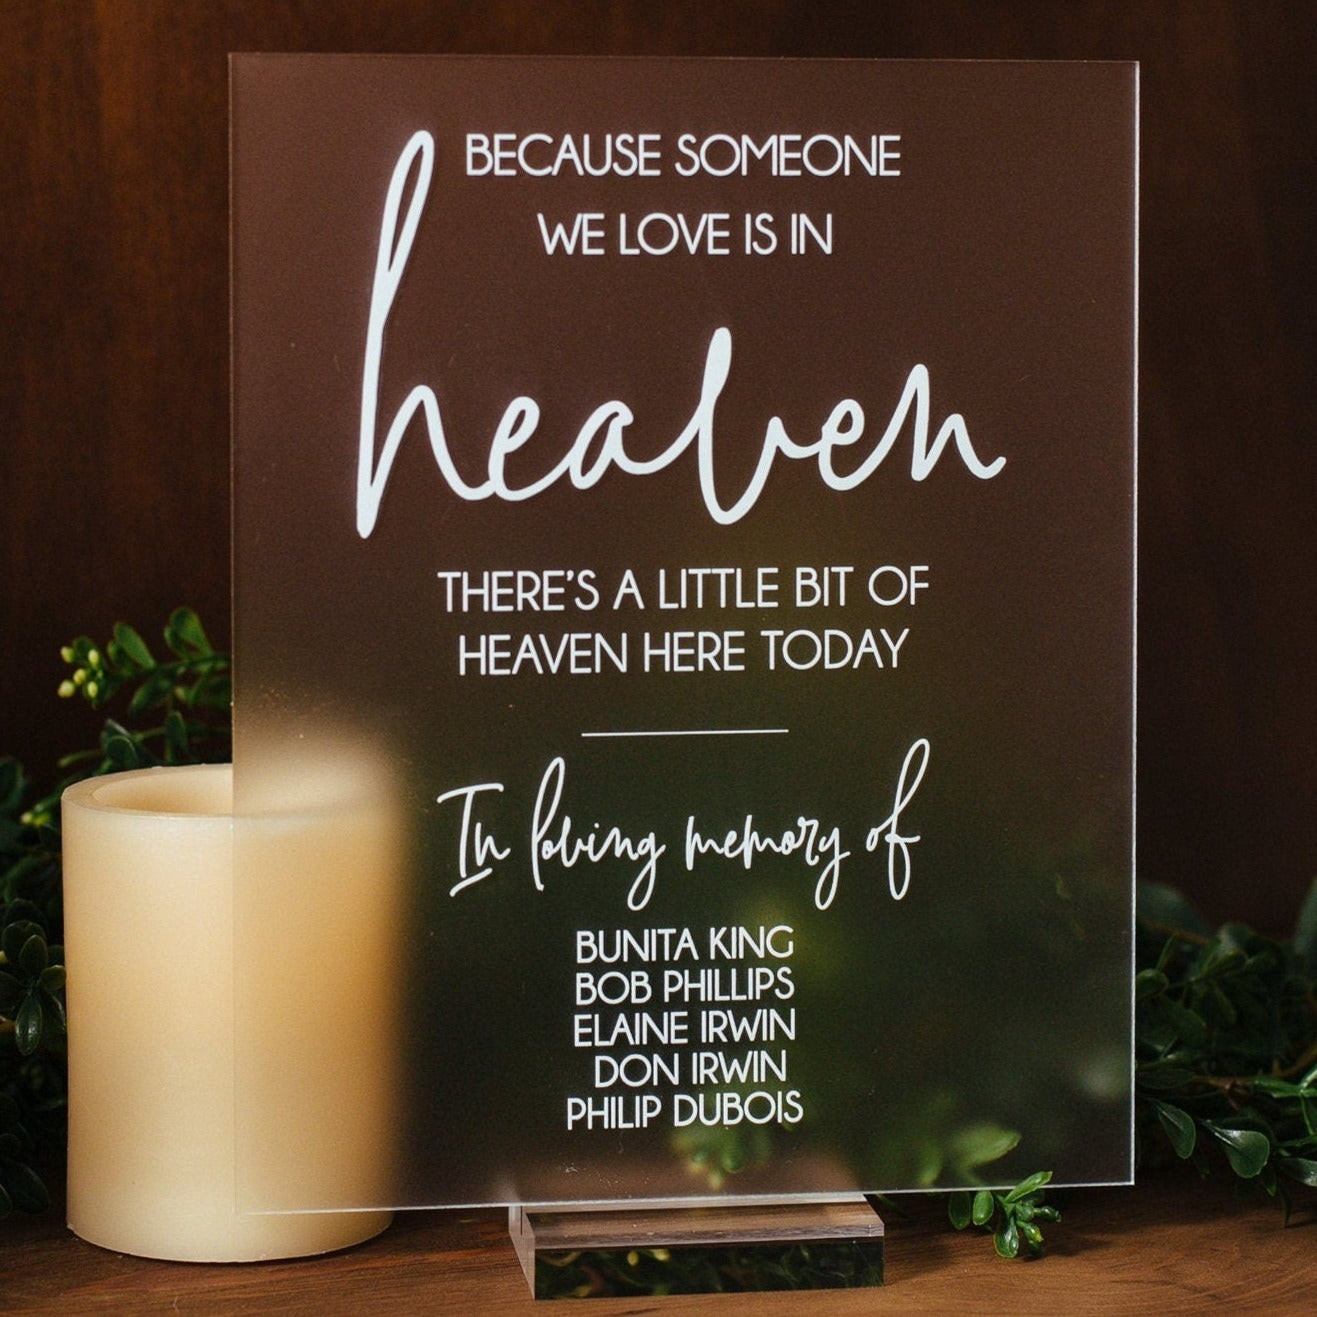 Because Someone We Love In In Heaven (personalized with names of loved ones) S3-MS3